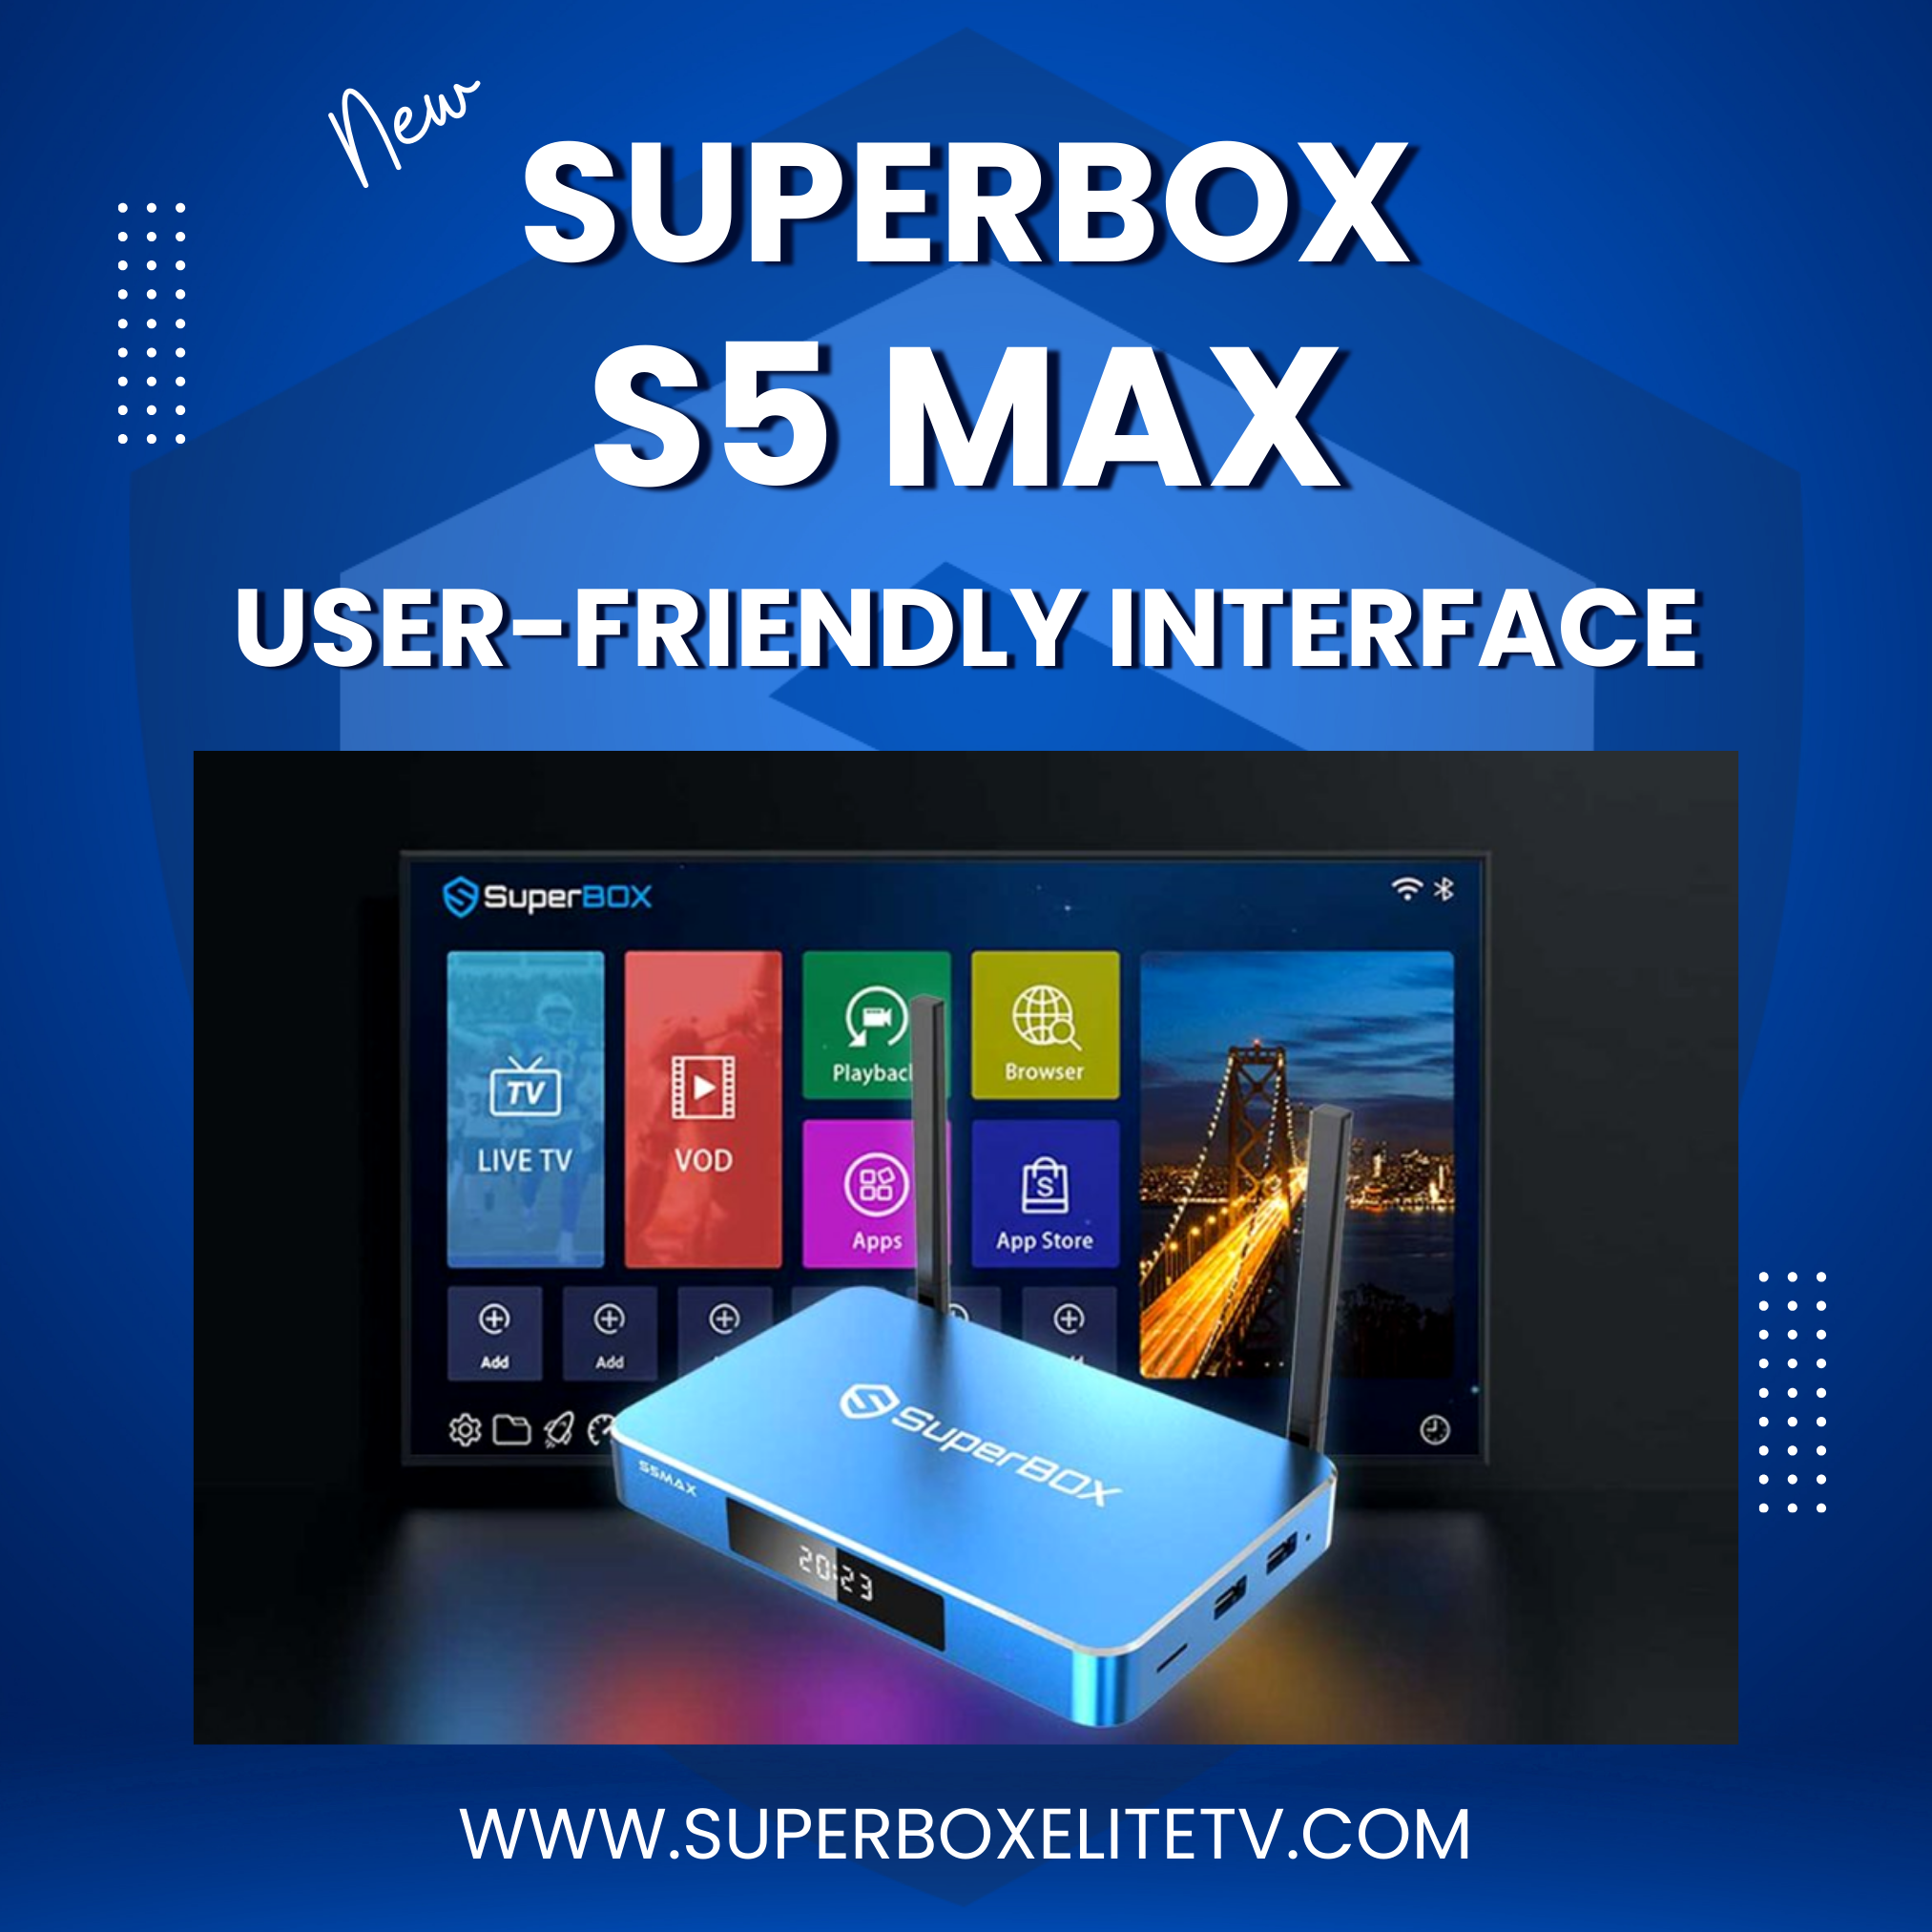 SuperBox S5 Max (New) Fully Load 6k 4GB Ram + 64GB, Voice Control Remote, ANDROID TV Dual Band Wi-Fi, 7 Days Playback Ultra HD 6K Video Player